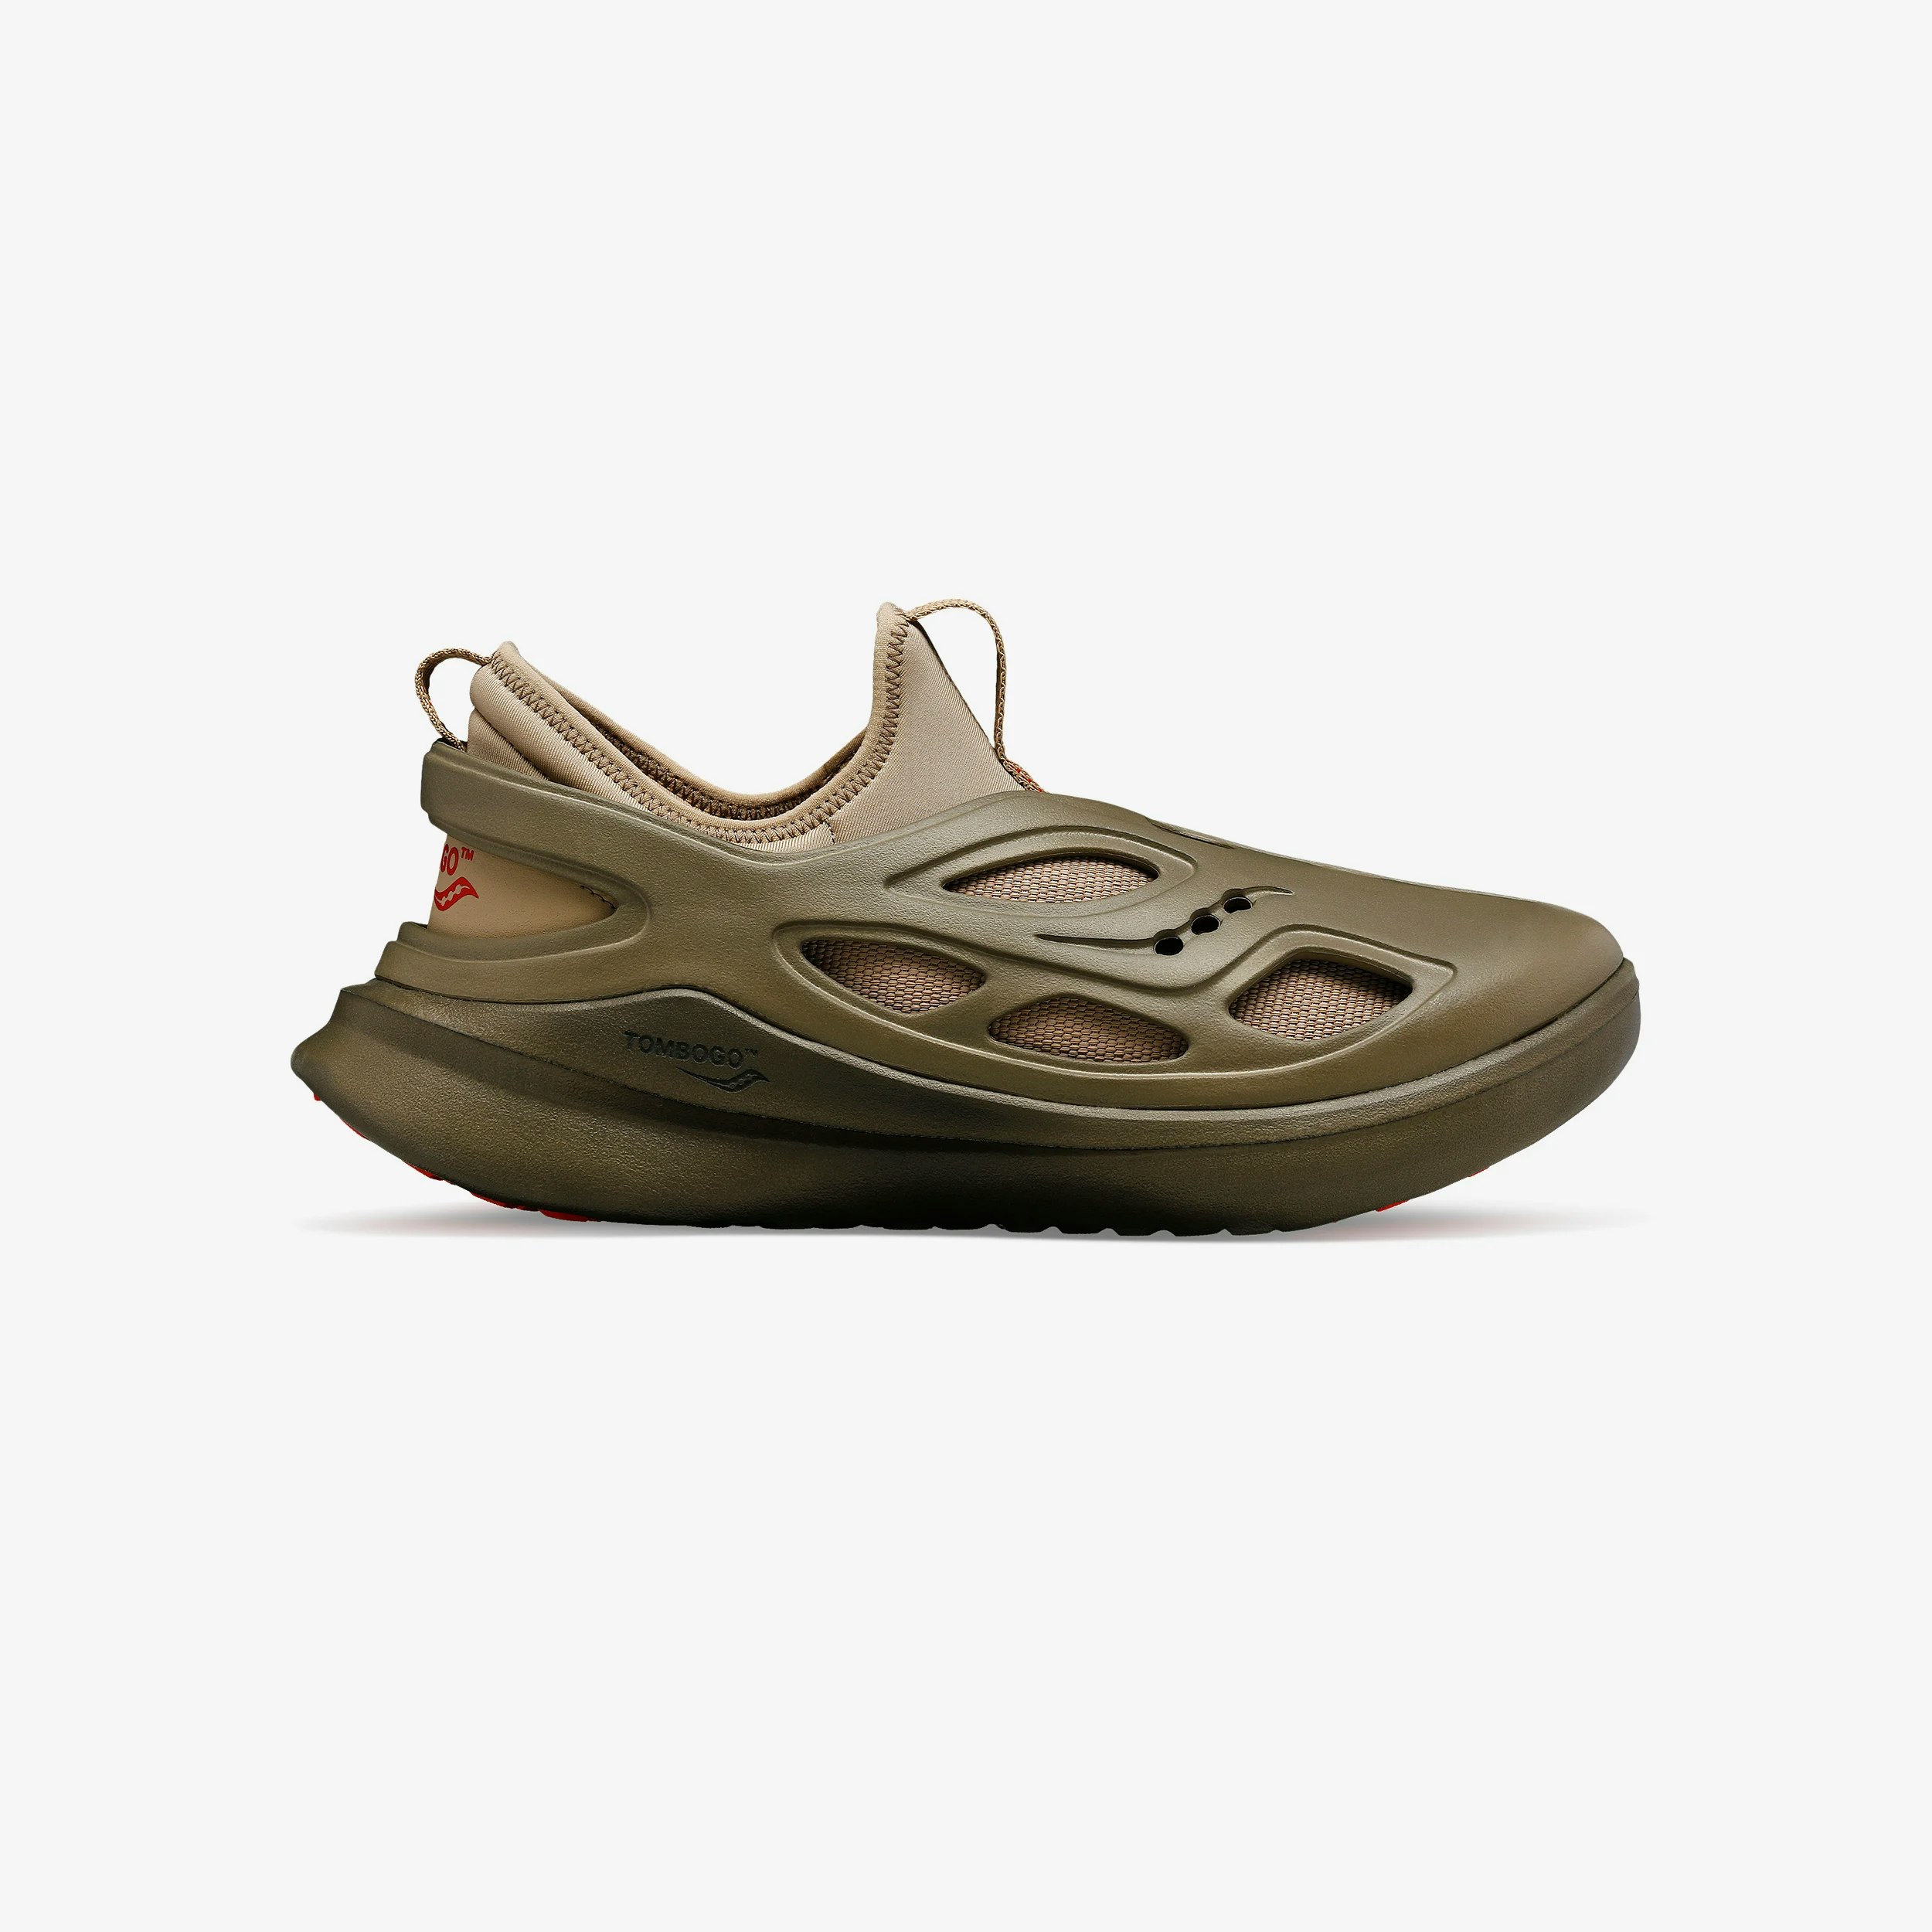 Tombogo x Saucony Butterfly "Boulder Brown"